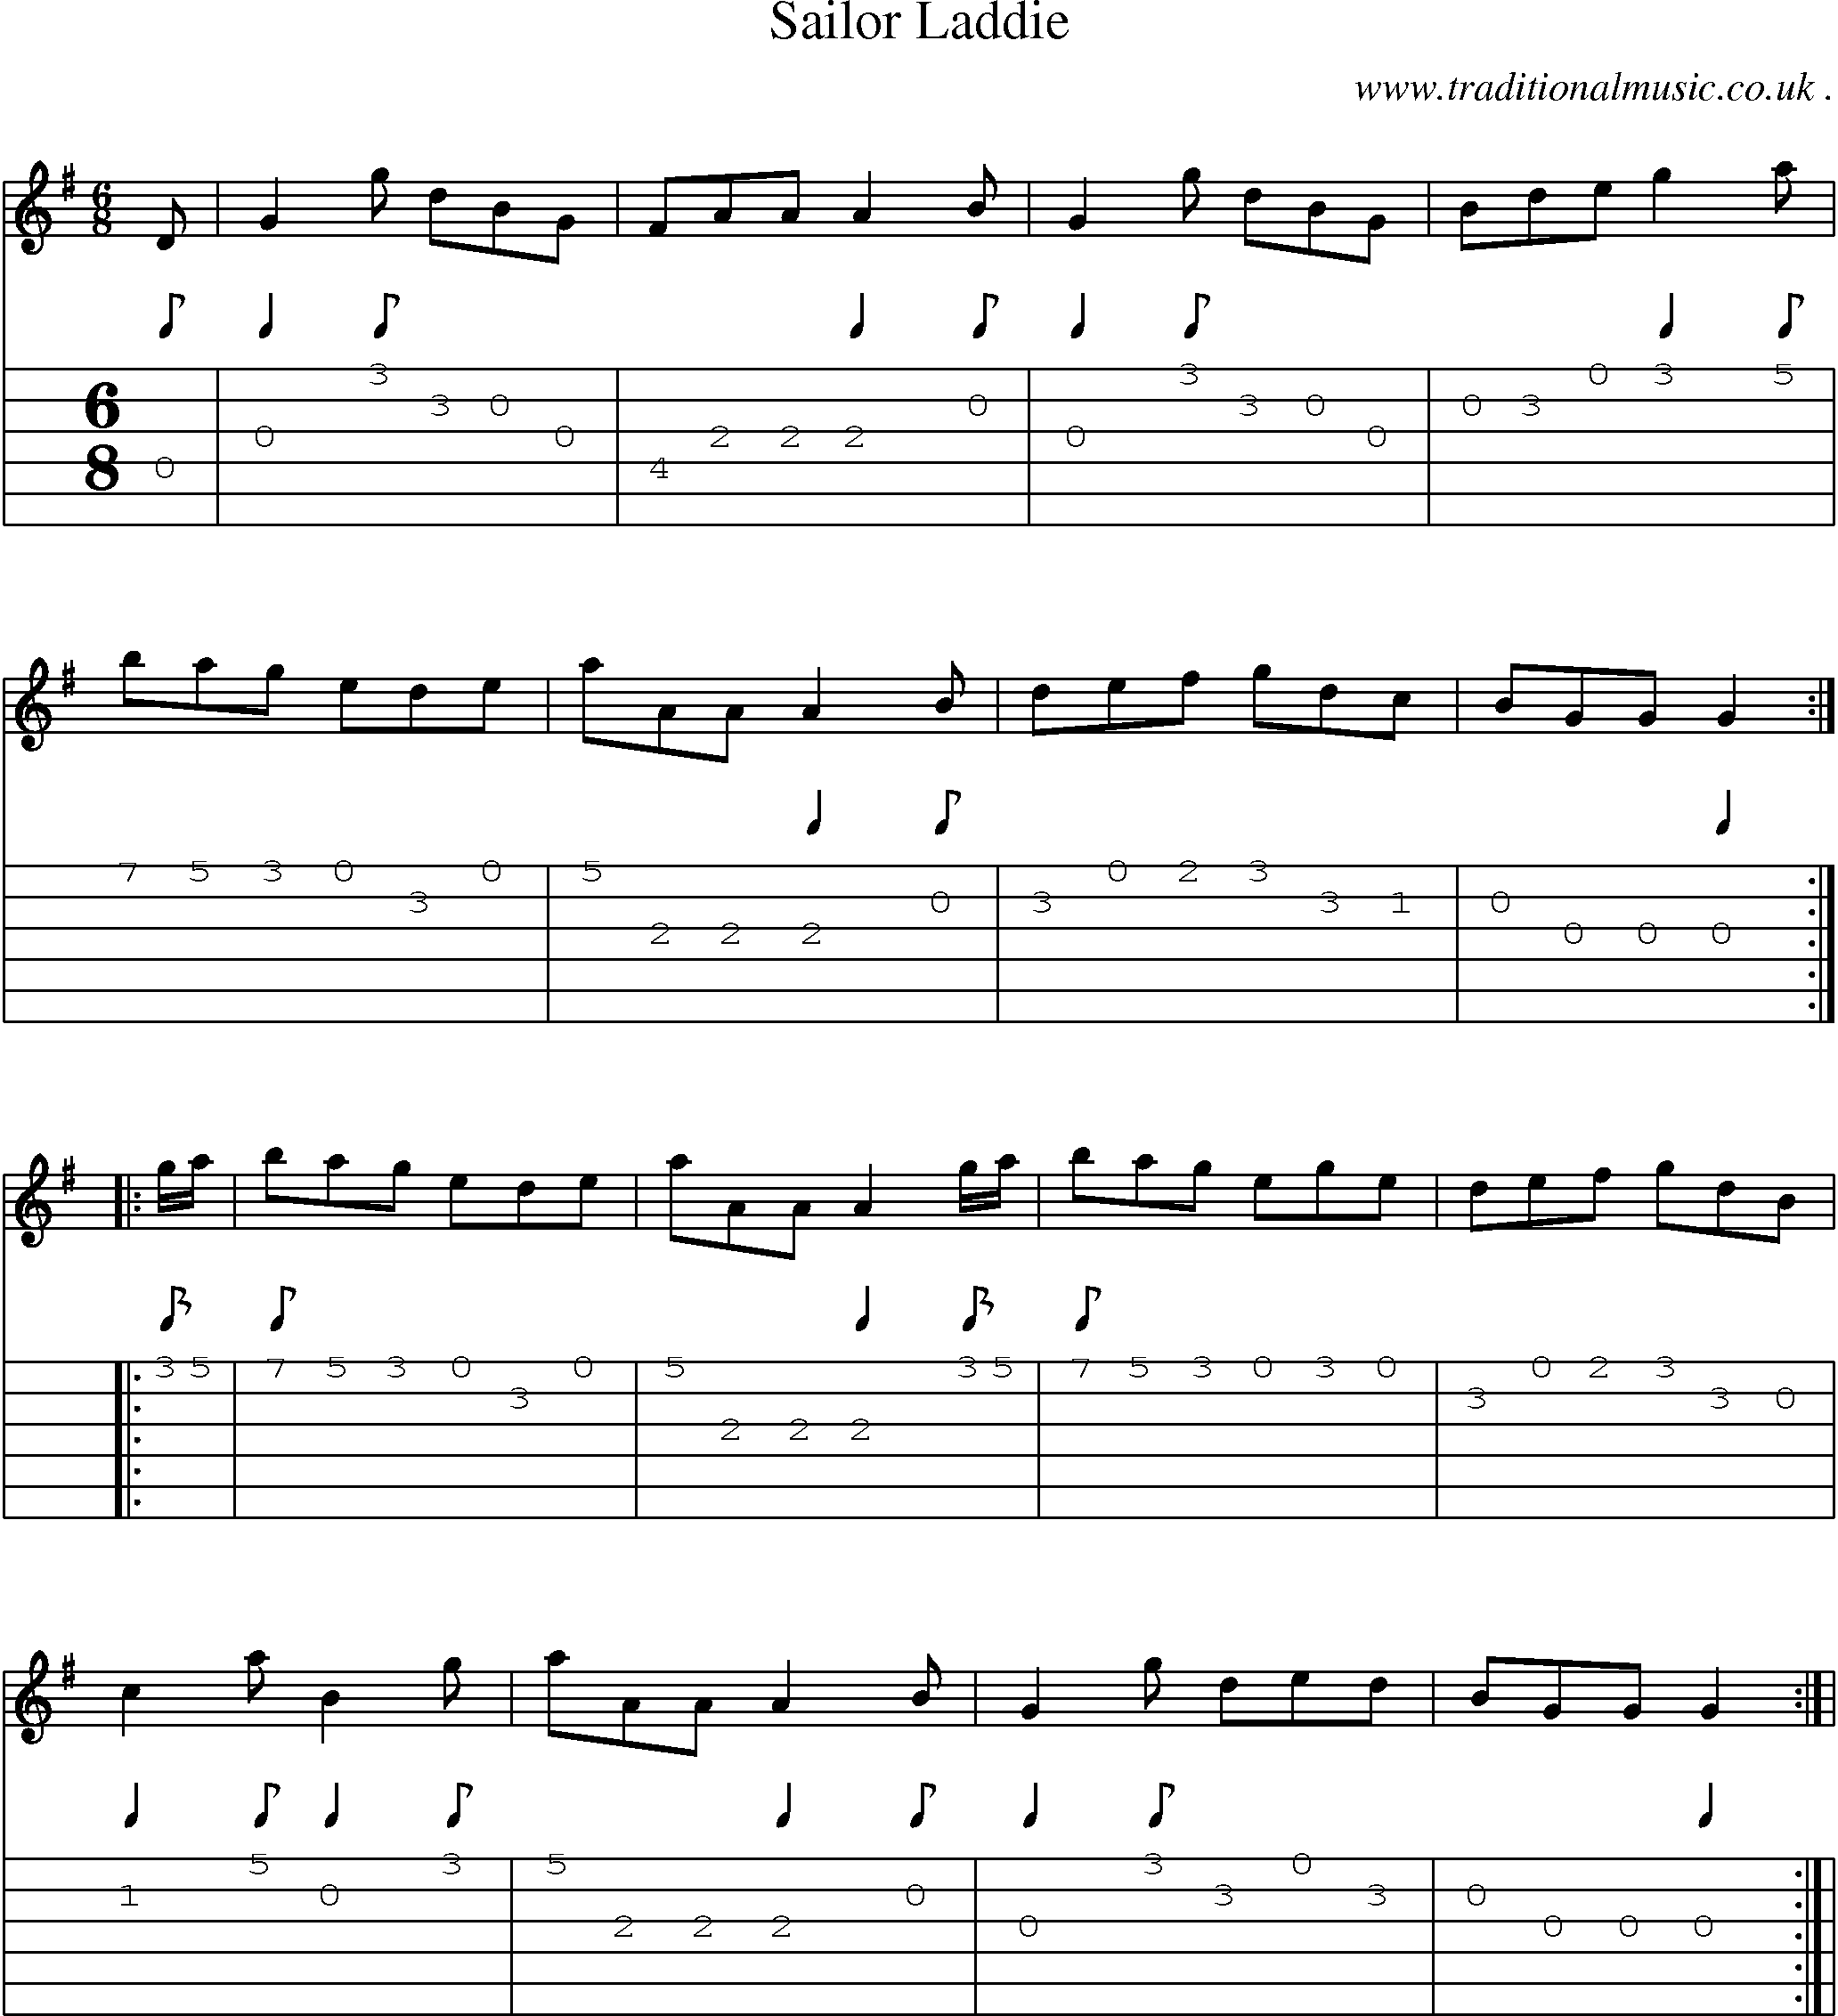 Sheet-Music and Guitar Tabs for Sailor Laddie